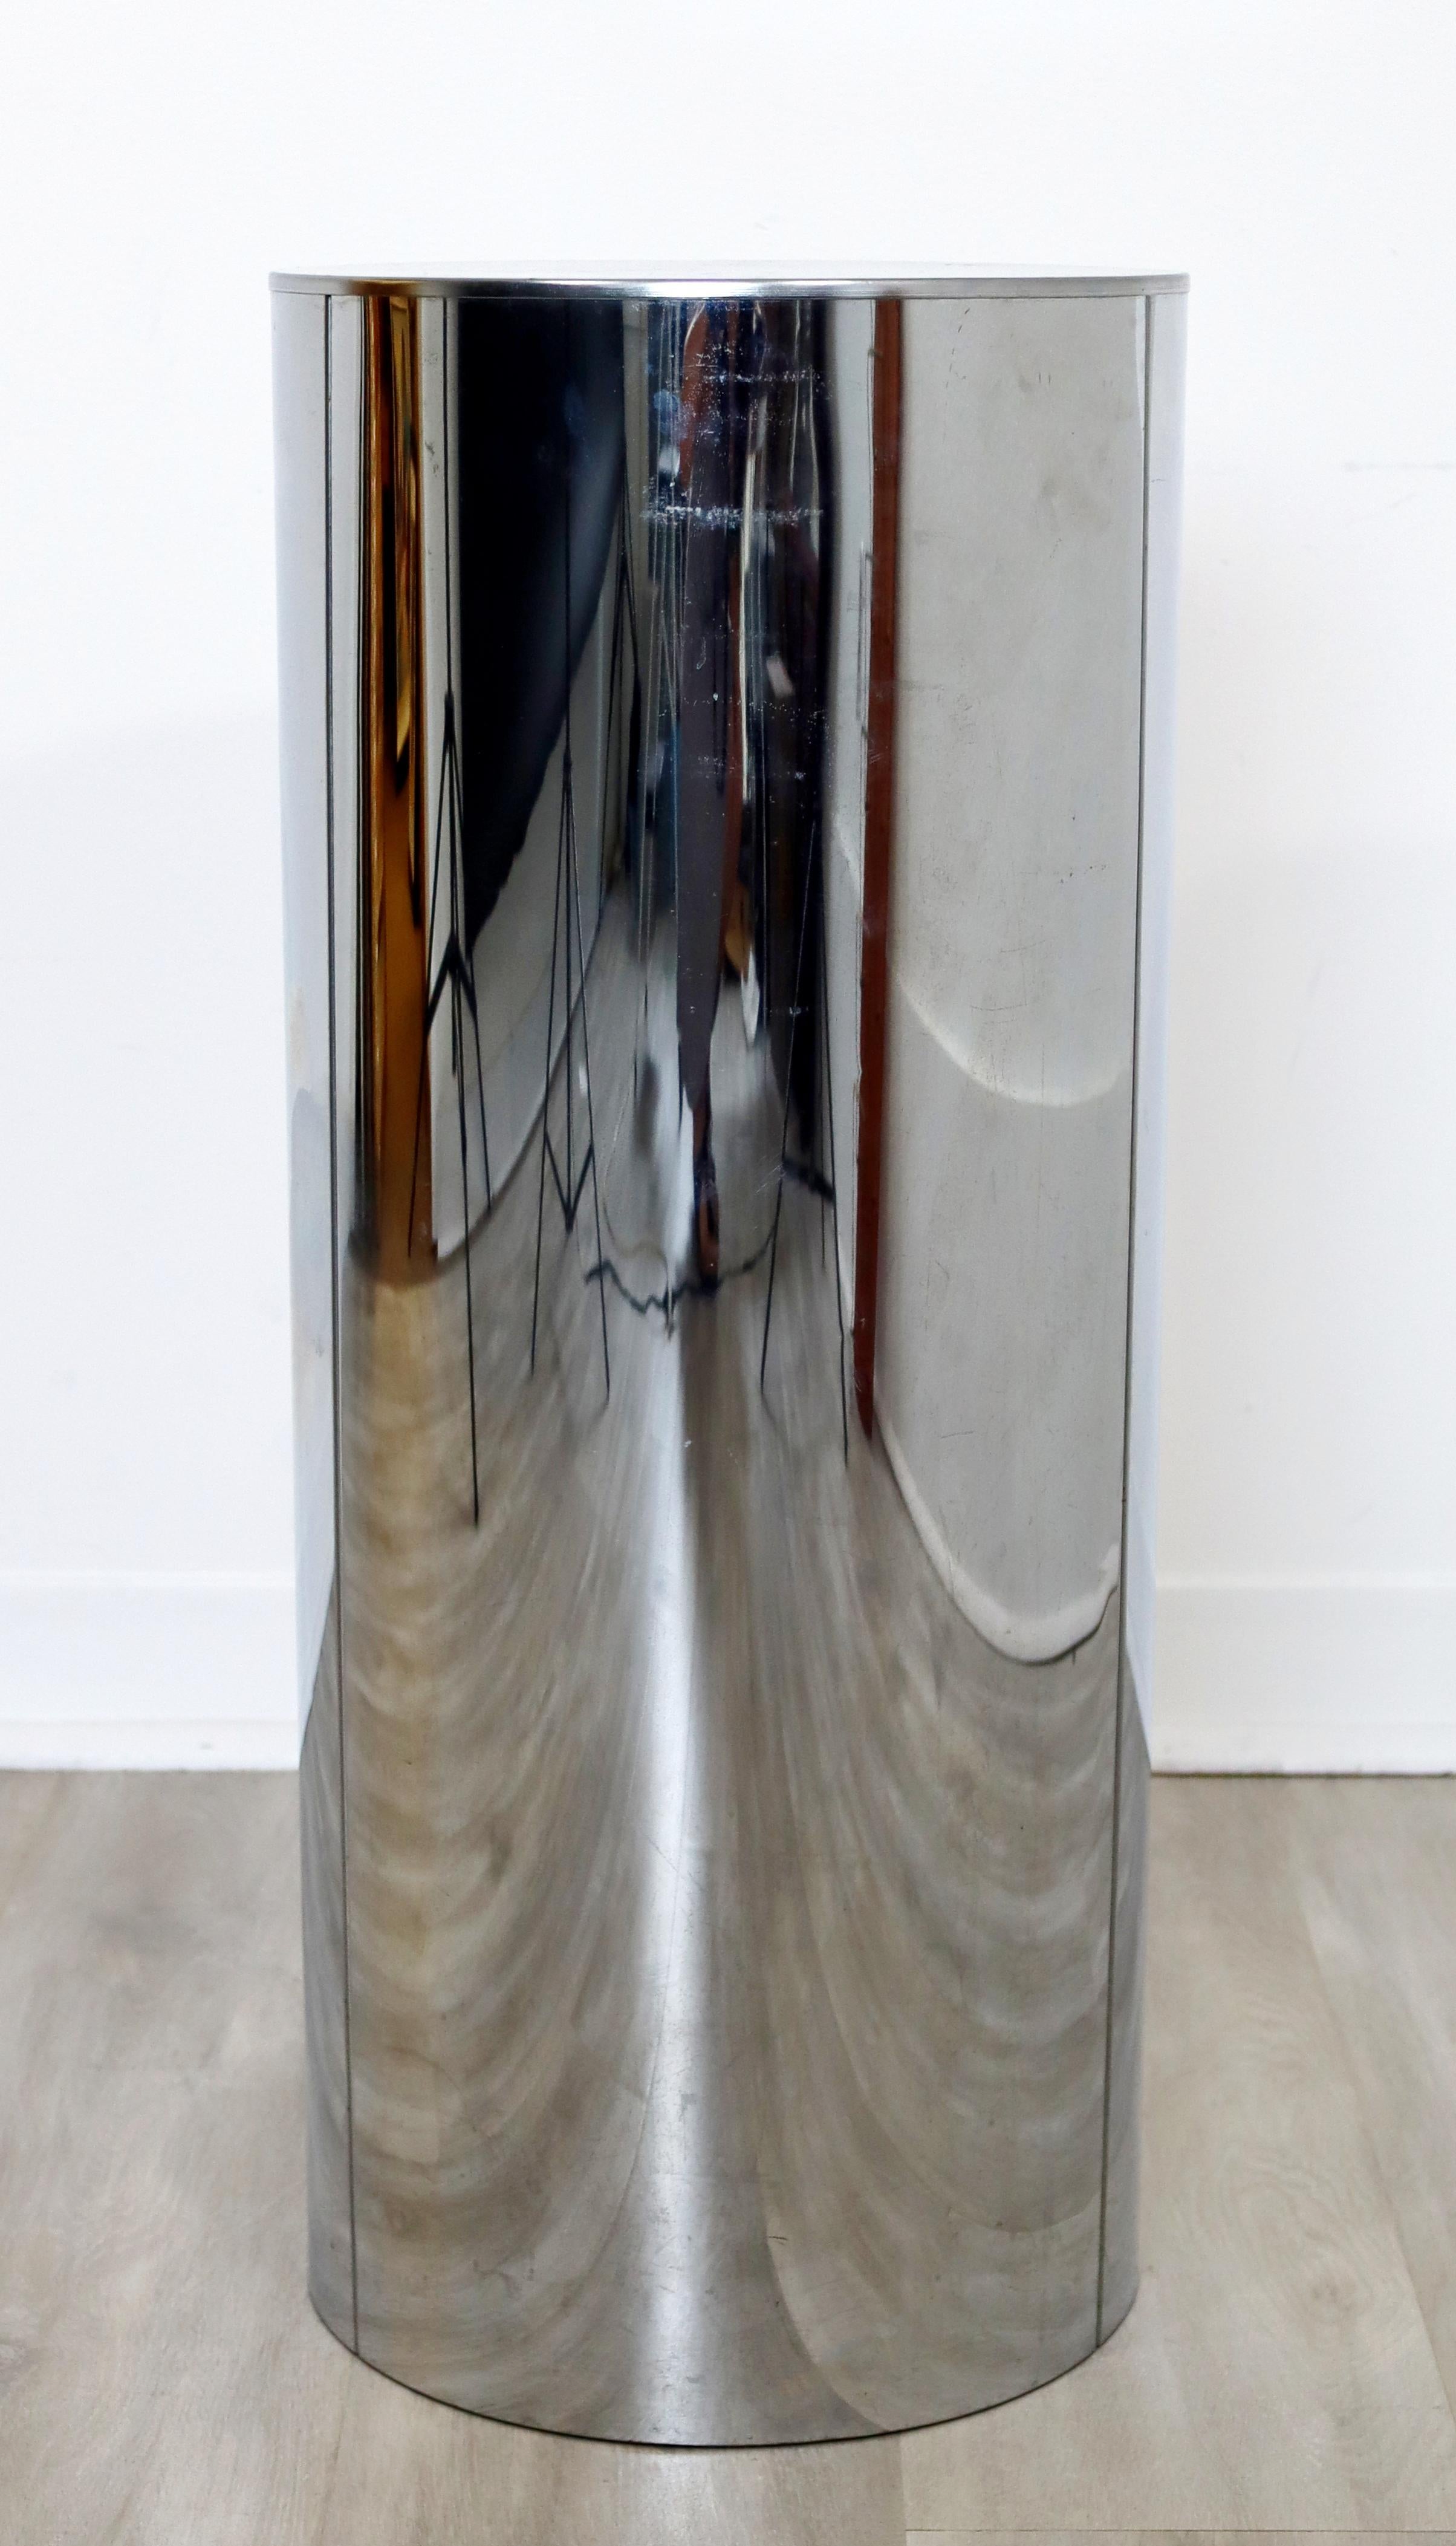 For your consideration is a terrific, chrome, round display pedestal stand, in the style of Curtis Jeré or Paul Mayan, circa the 1960s. In very good vintage condition. The dimensions are 12